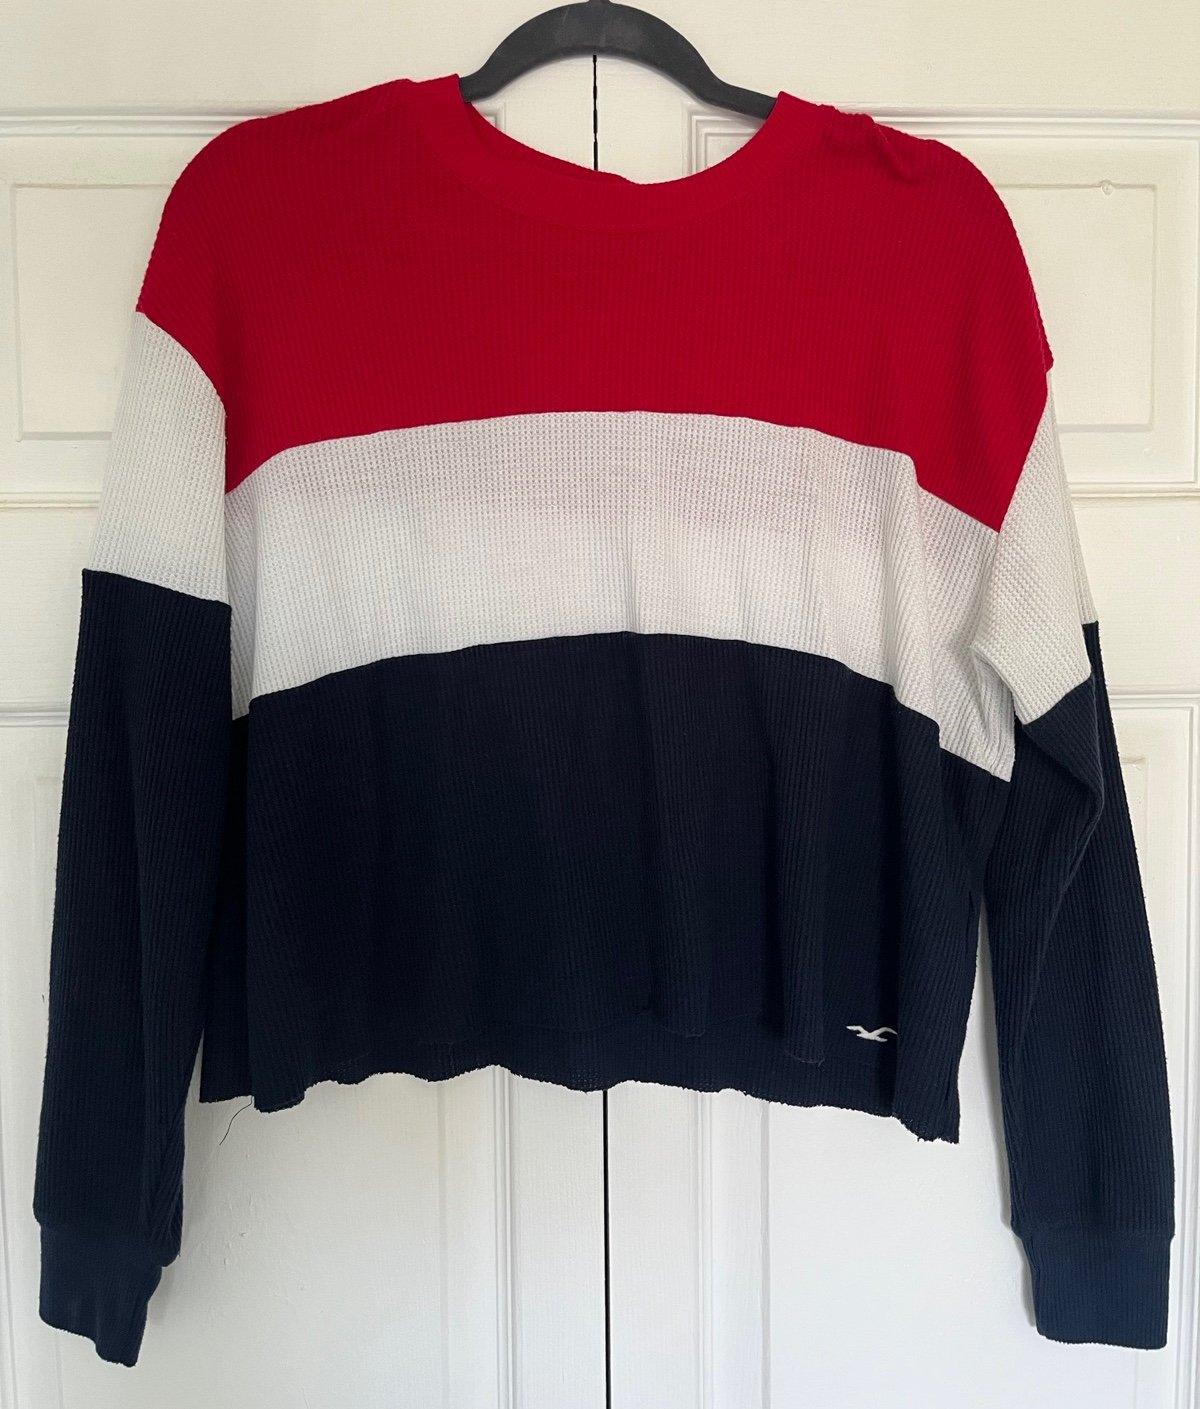 Wholesale price Hollister Sweater Cropped H3VrNJkEd Eve